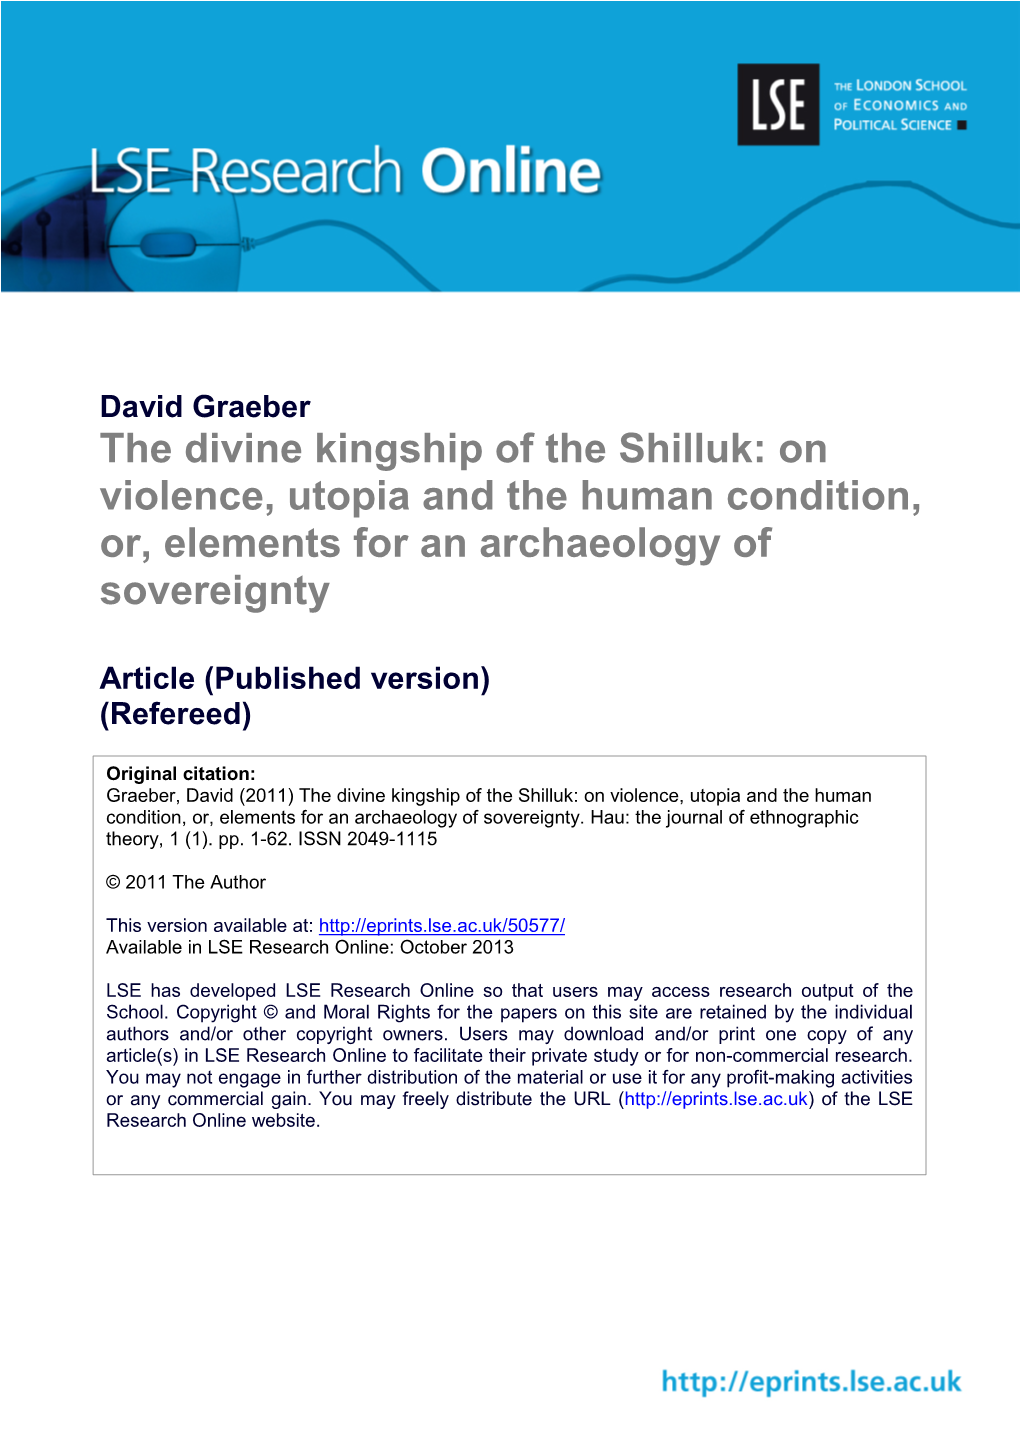 David Graeber the Divine Kingship of the Shilluk: on Violence, Utopia and the Human Condition, Or, Elements for an Archaeology of Sovereignty